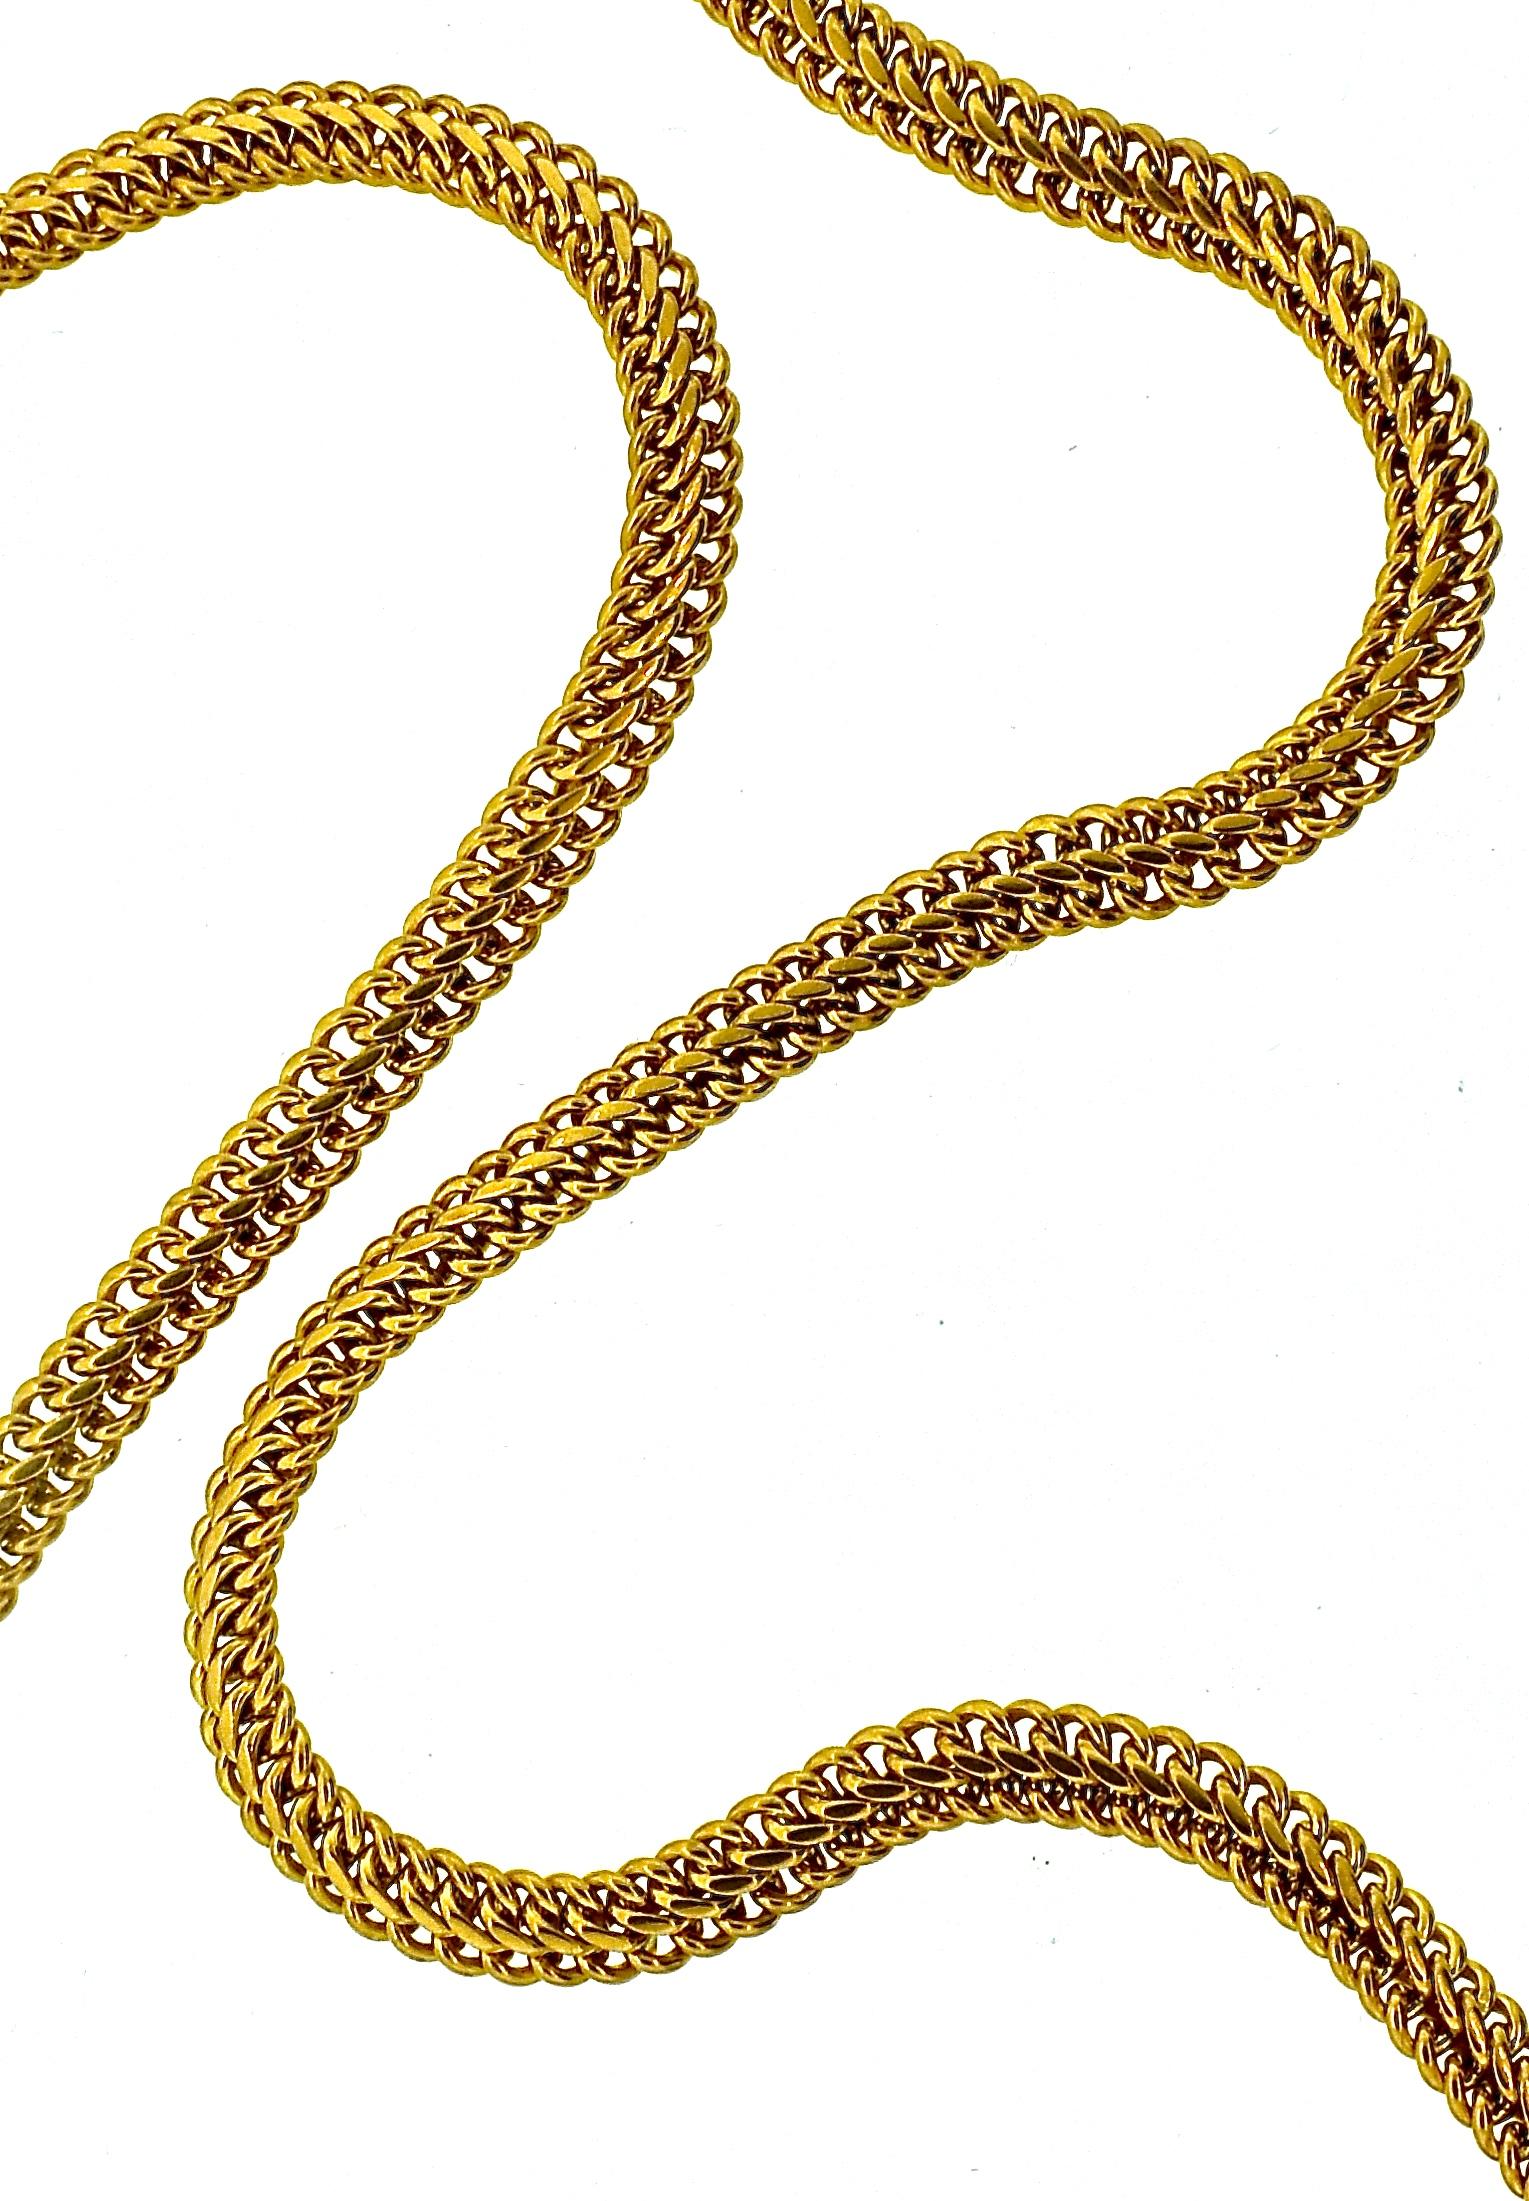 Victorian Antique Gold Chain with Fobs, circa 1900